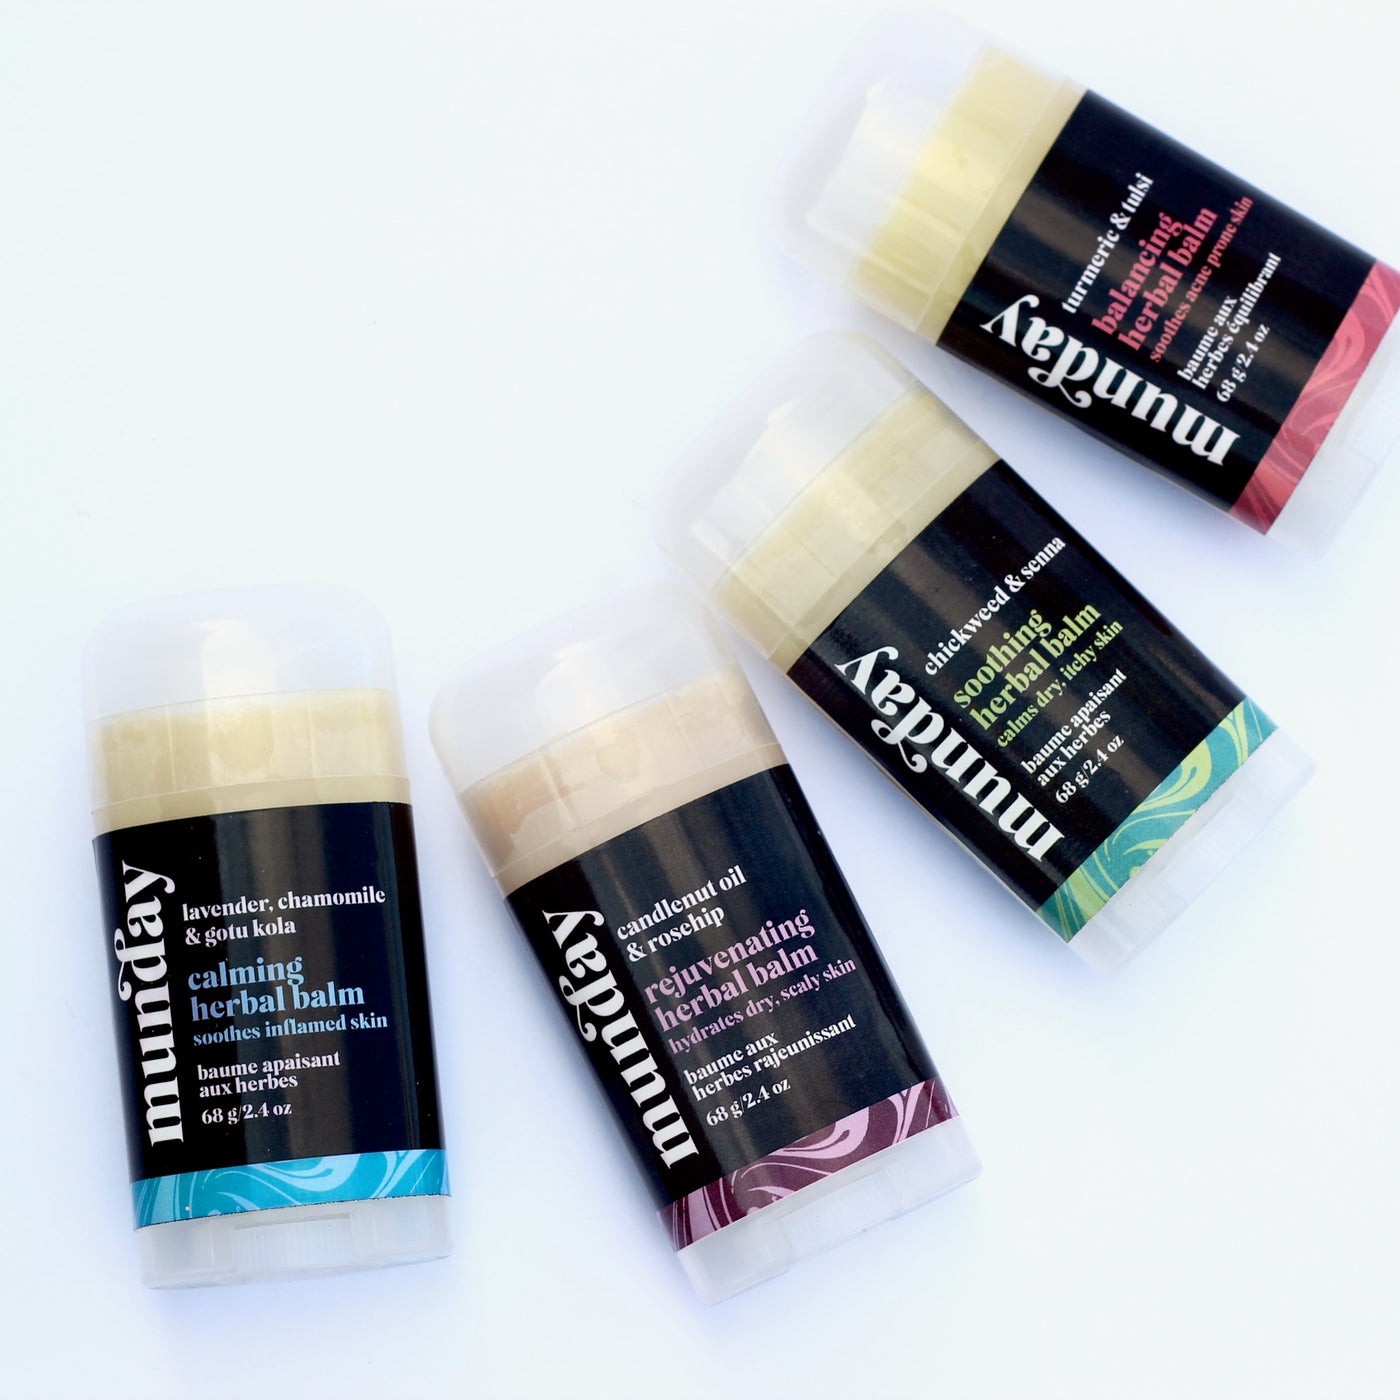 Rejuvenating herbal balms in a twist-up stick form for those especially dry areas like elbows, knees and shins